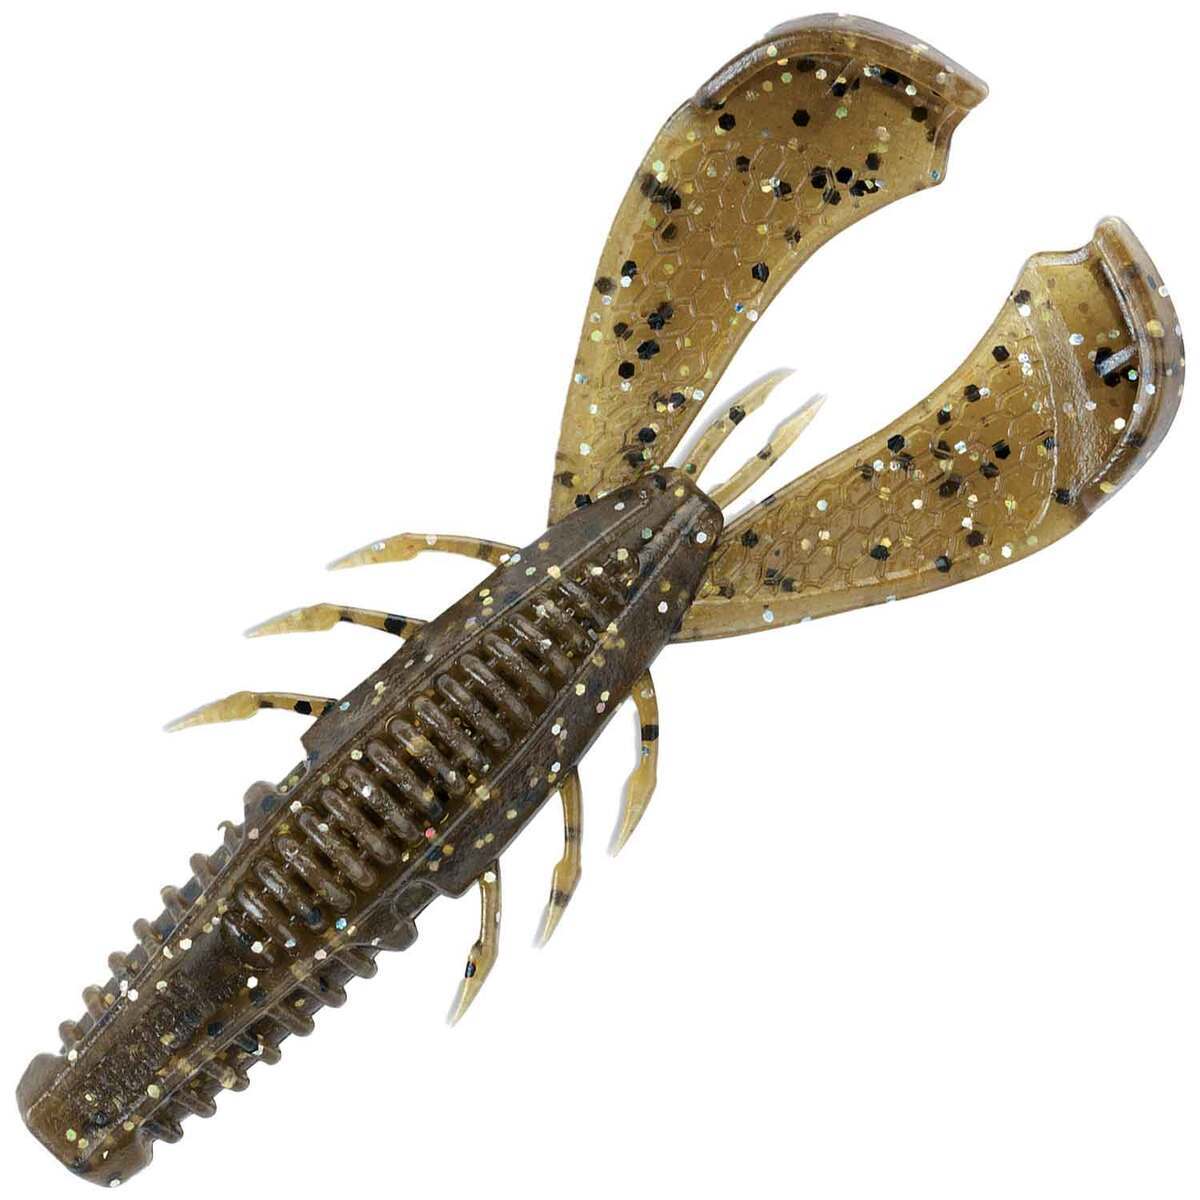 Rapala CRUSH CITY Cleanup Craw Bait - Bama Craw, 2.83in